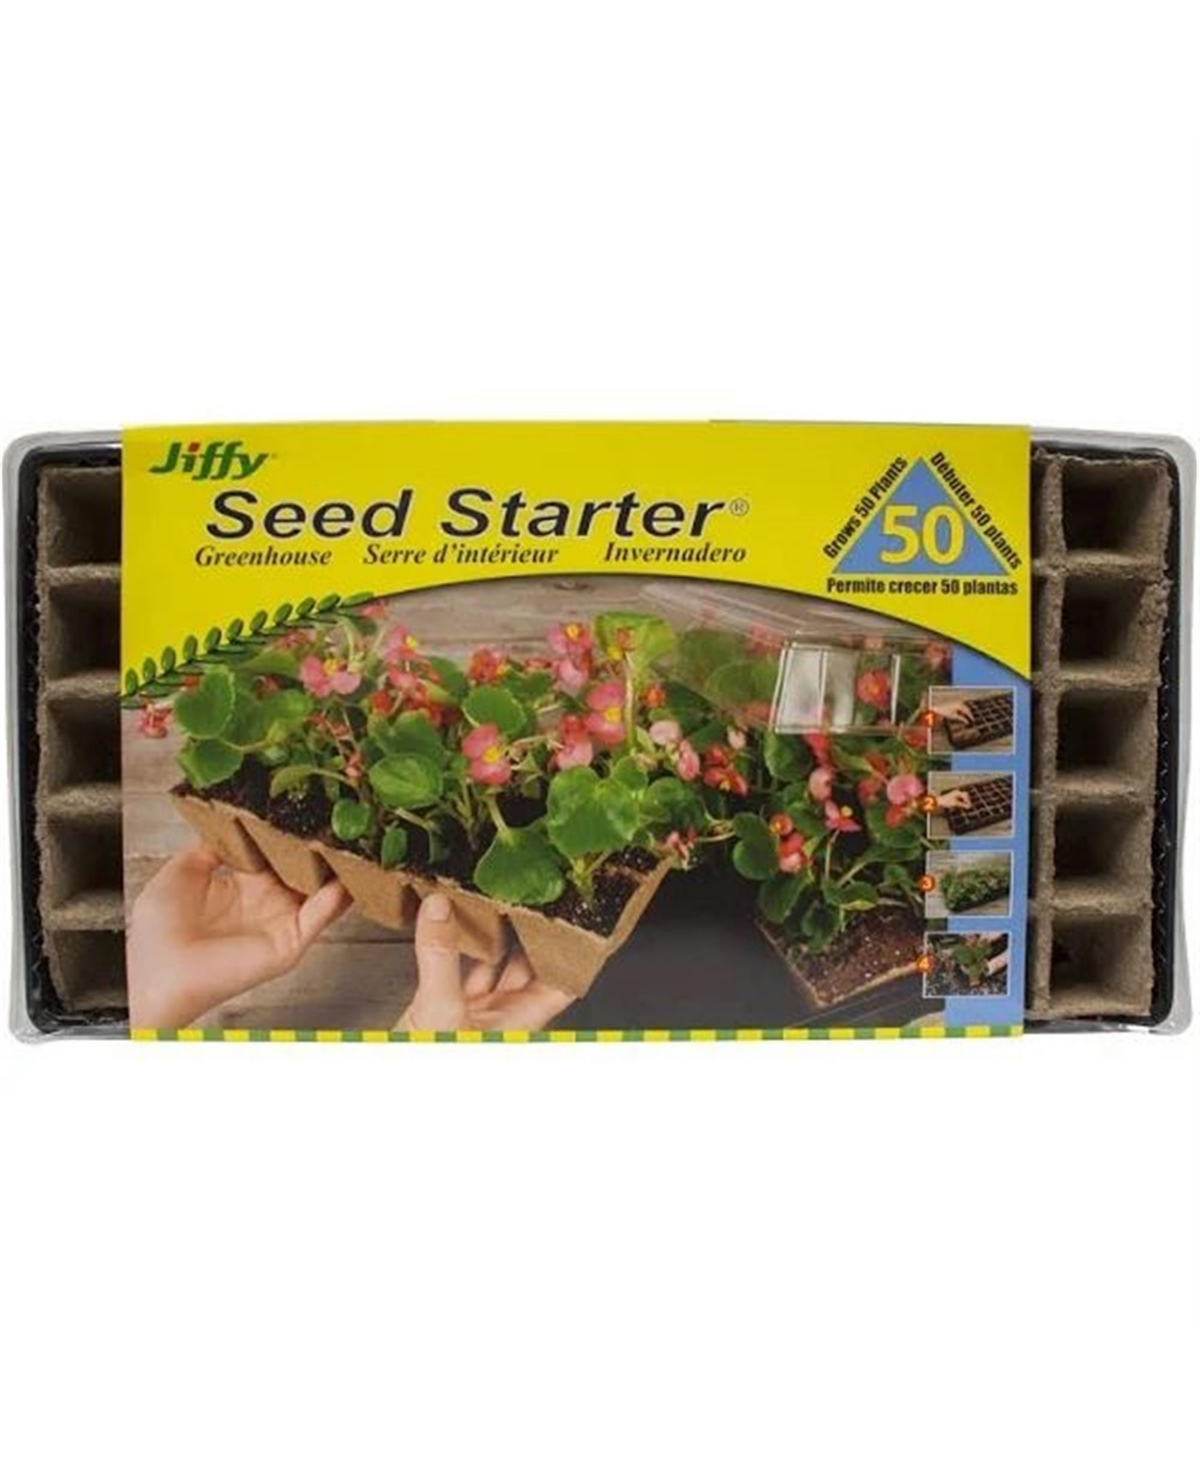 Seed Starter Greenhouse, Grows 50 Seeds - Multi